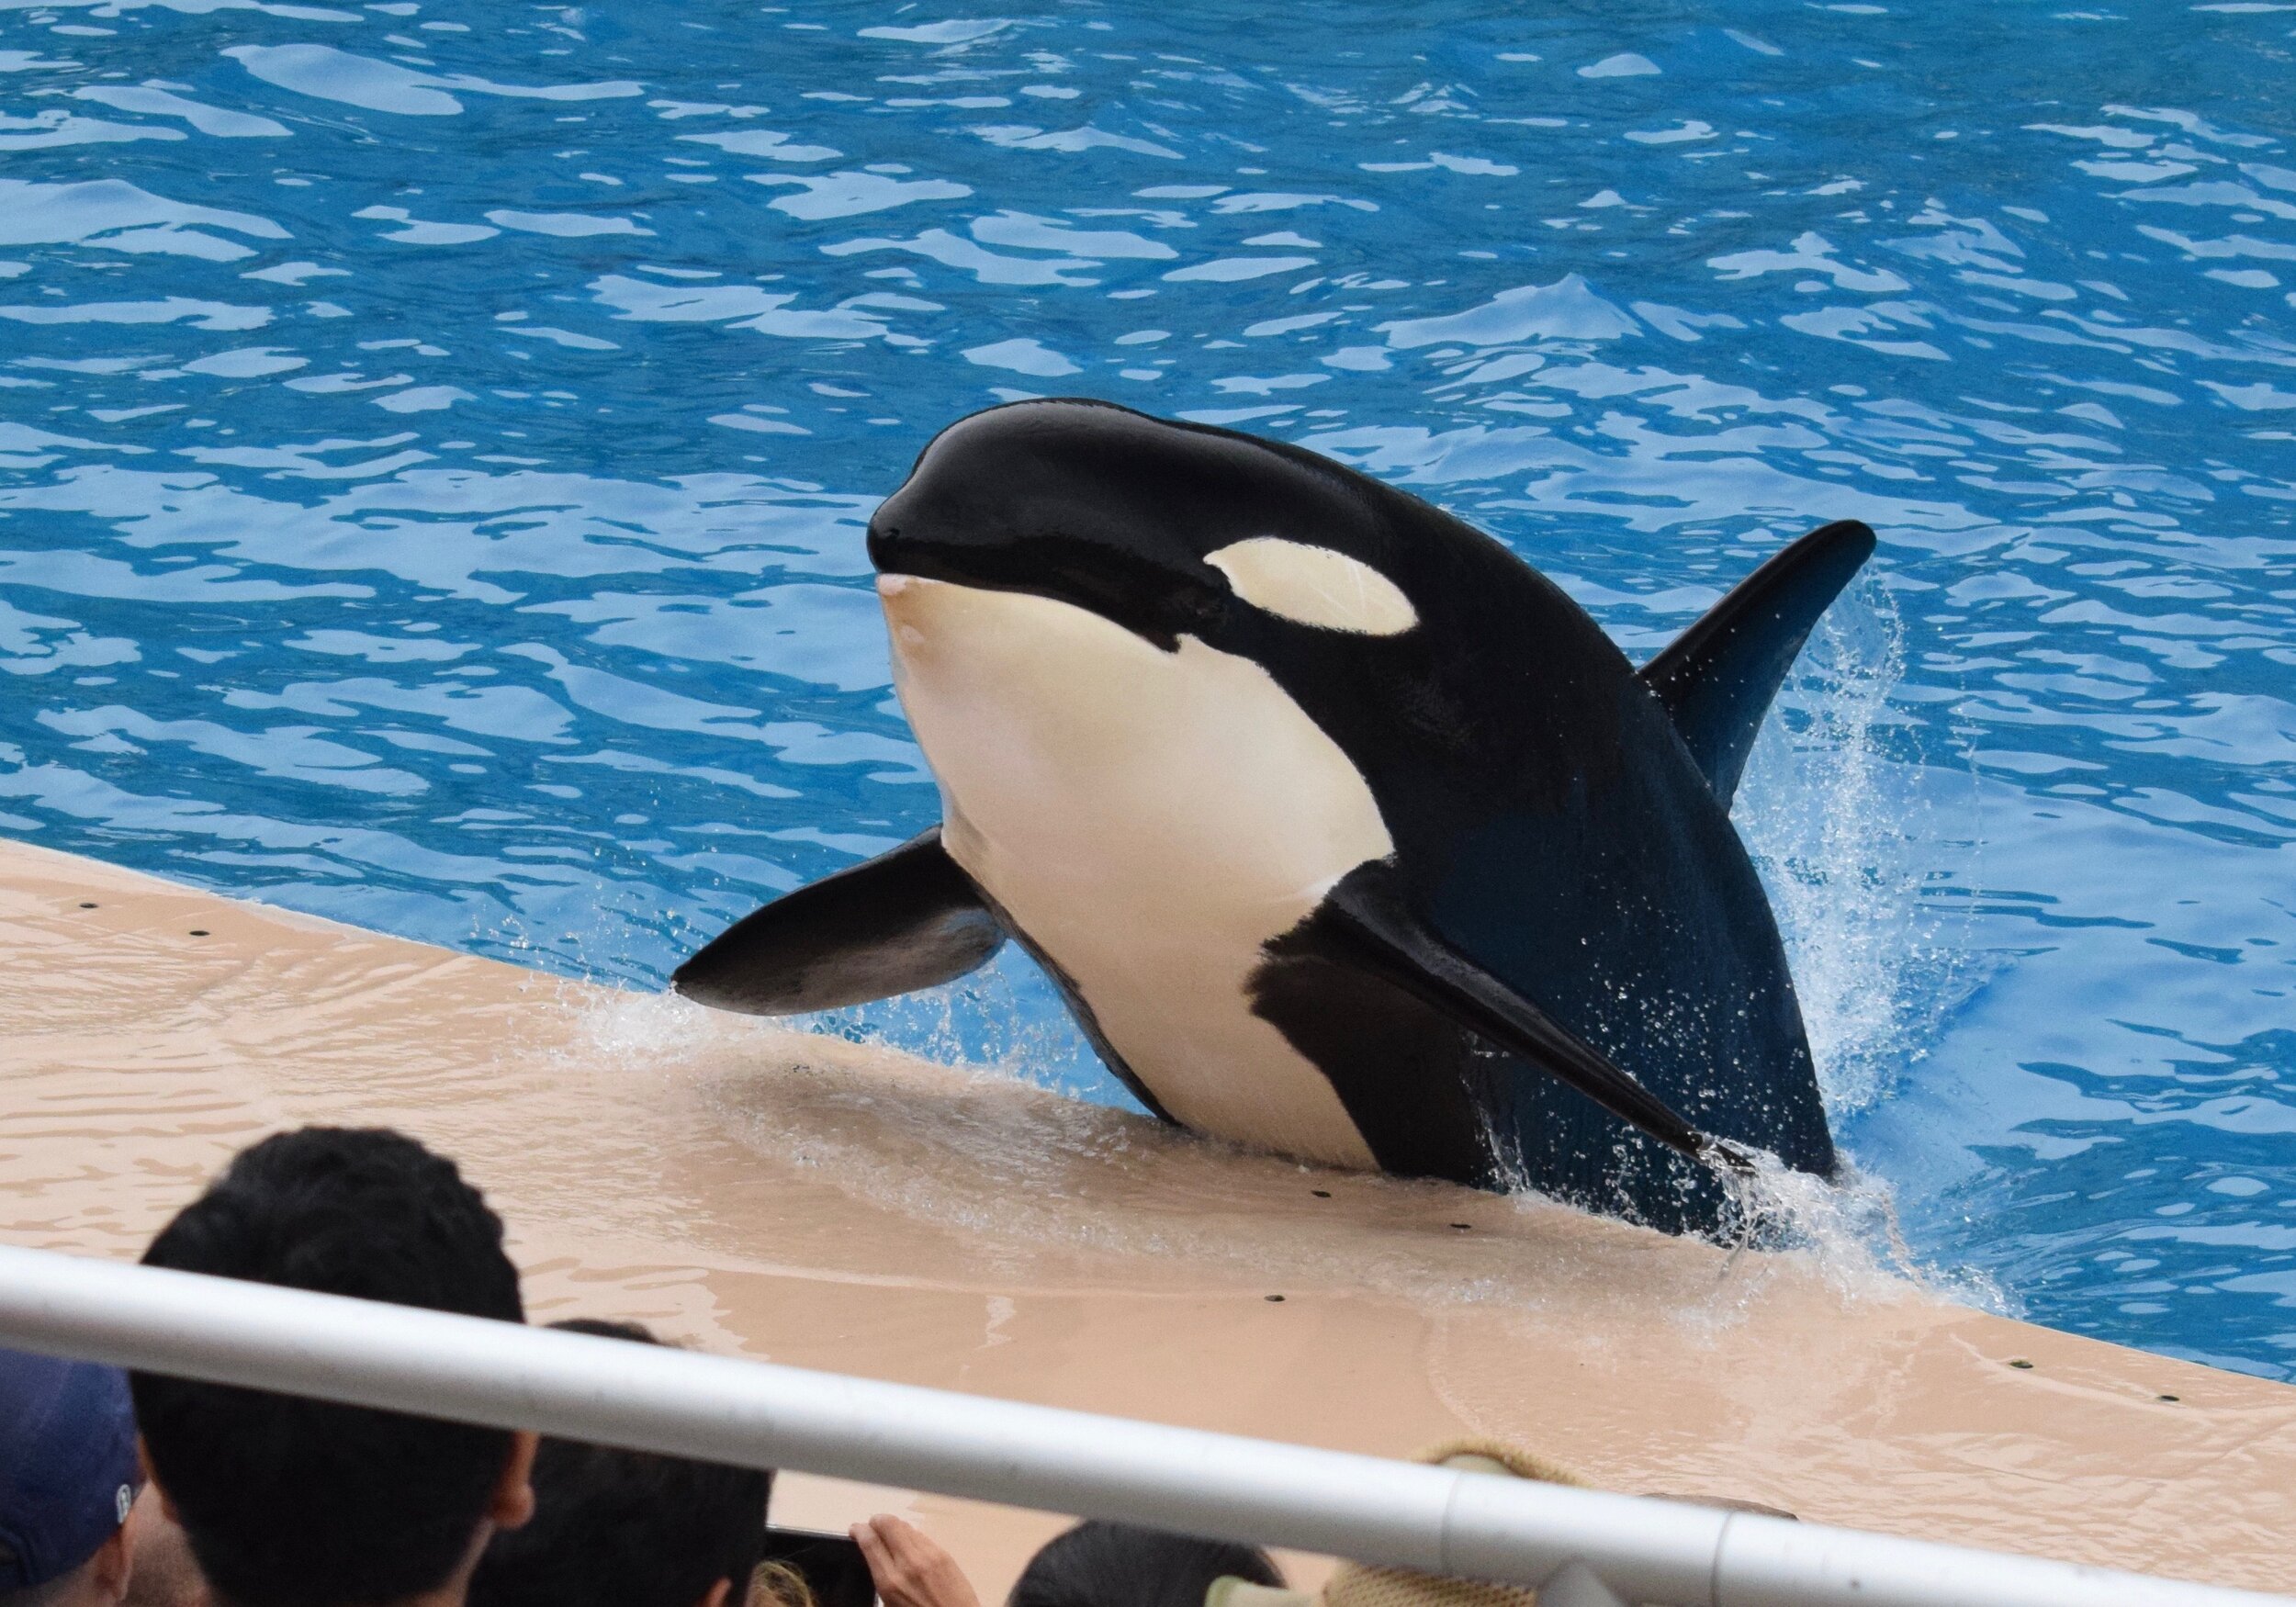 Corky the Northern resident killer whale - photo by Michael Reppy